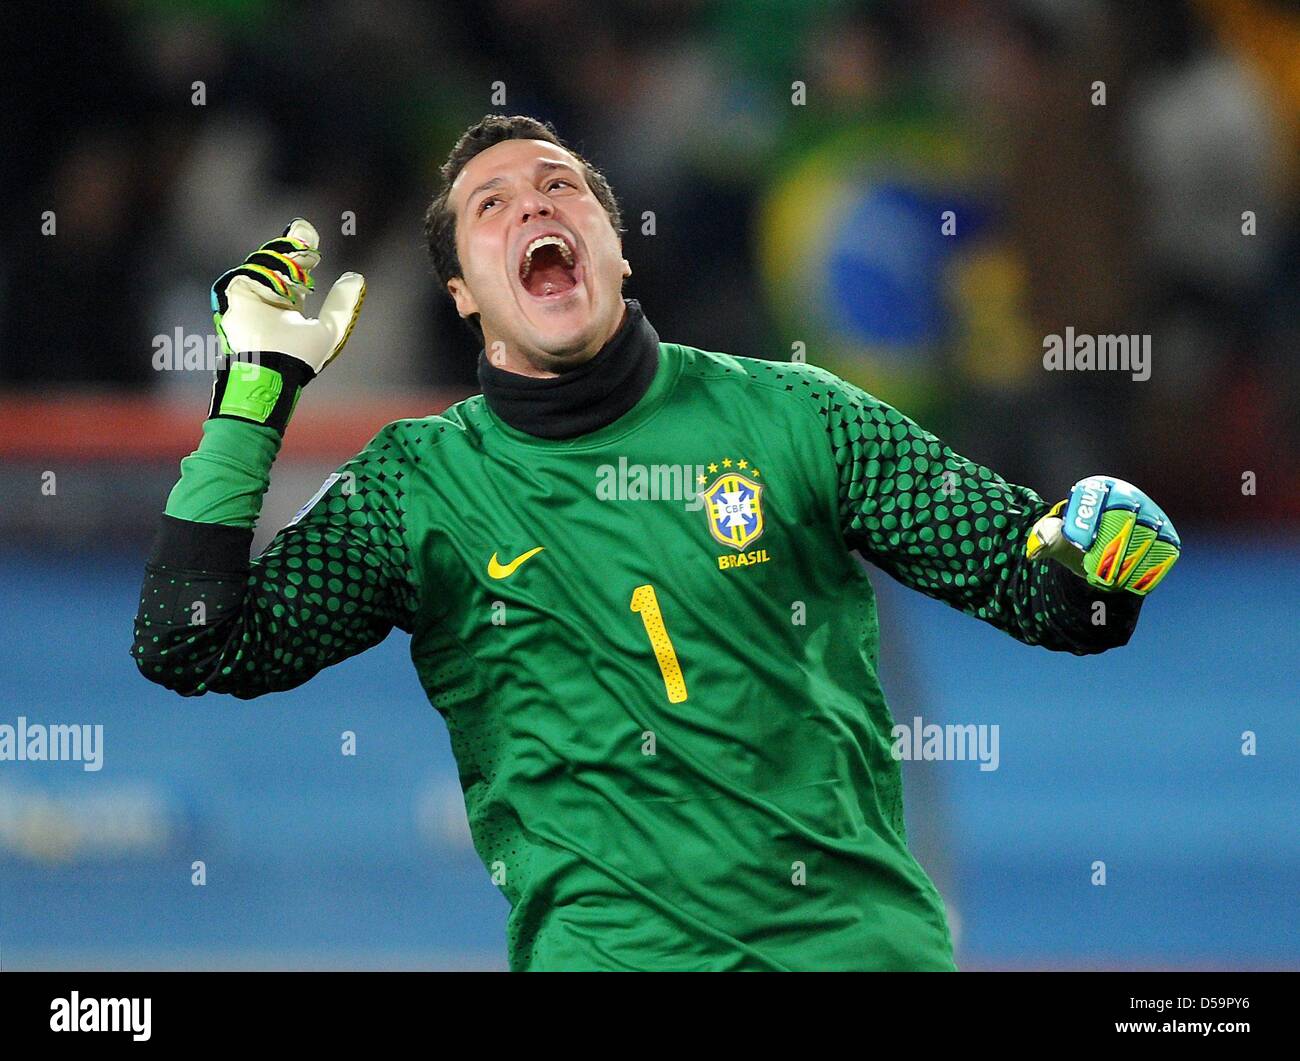 Brazil's goalkeeper Julio Cesar celebrates a goal during the 2010 FIFA World Cup Round of Sixteen match between Brazil and Chile at the Ellis Park Stadium in Johannesburg, South Africa 28 June 2010. Photo: Marcus Brandt dpa - Please refer to http://dpaq.de/FIFA-WM2010-TC Stock Photo